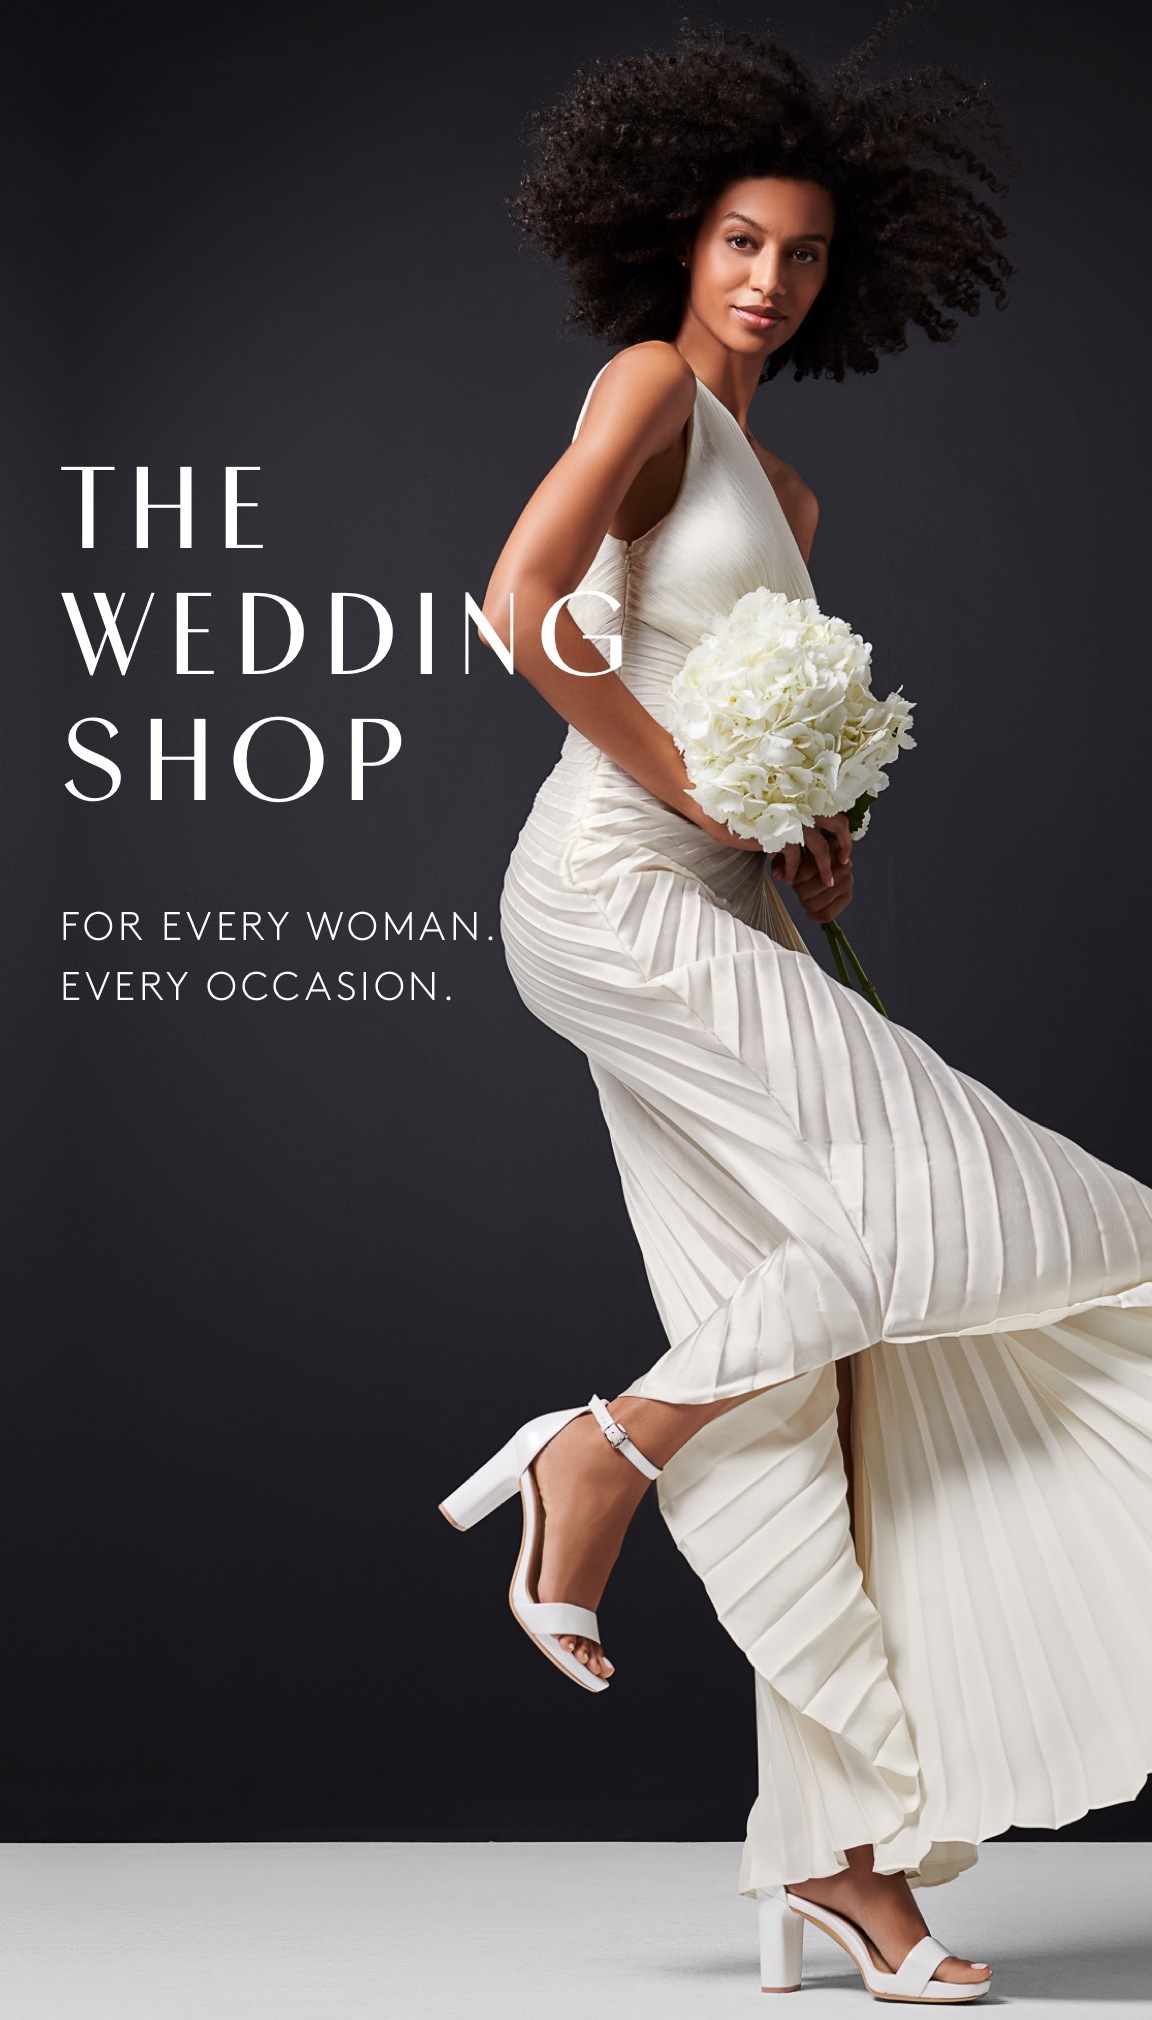 the wedding shop for every woman every wedding